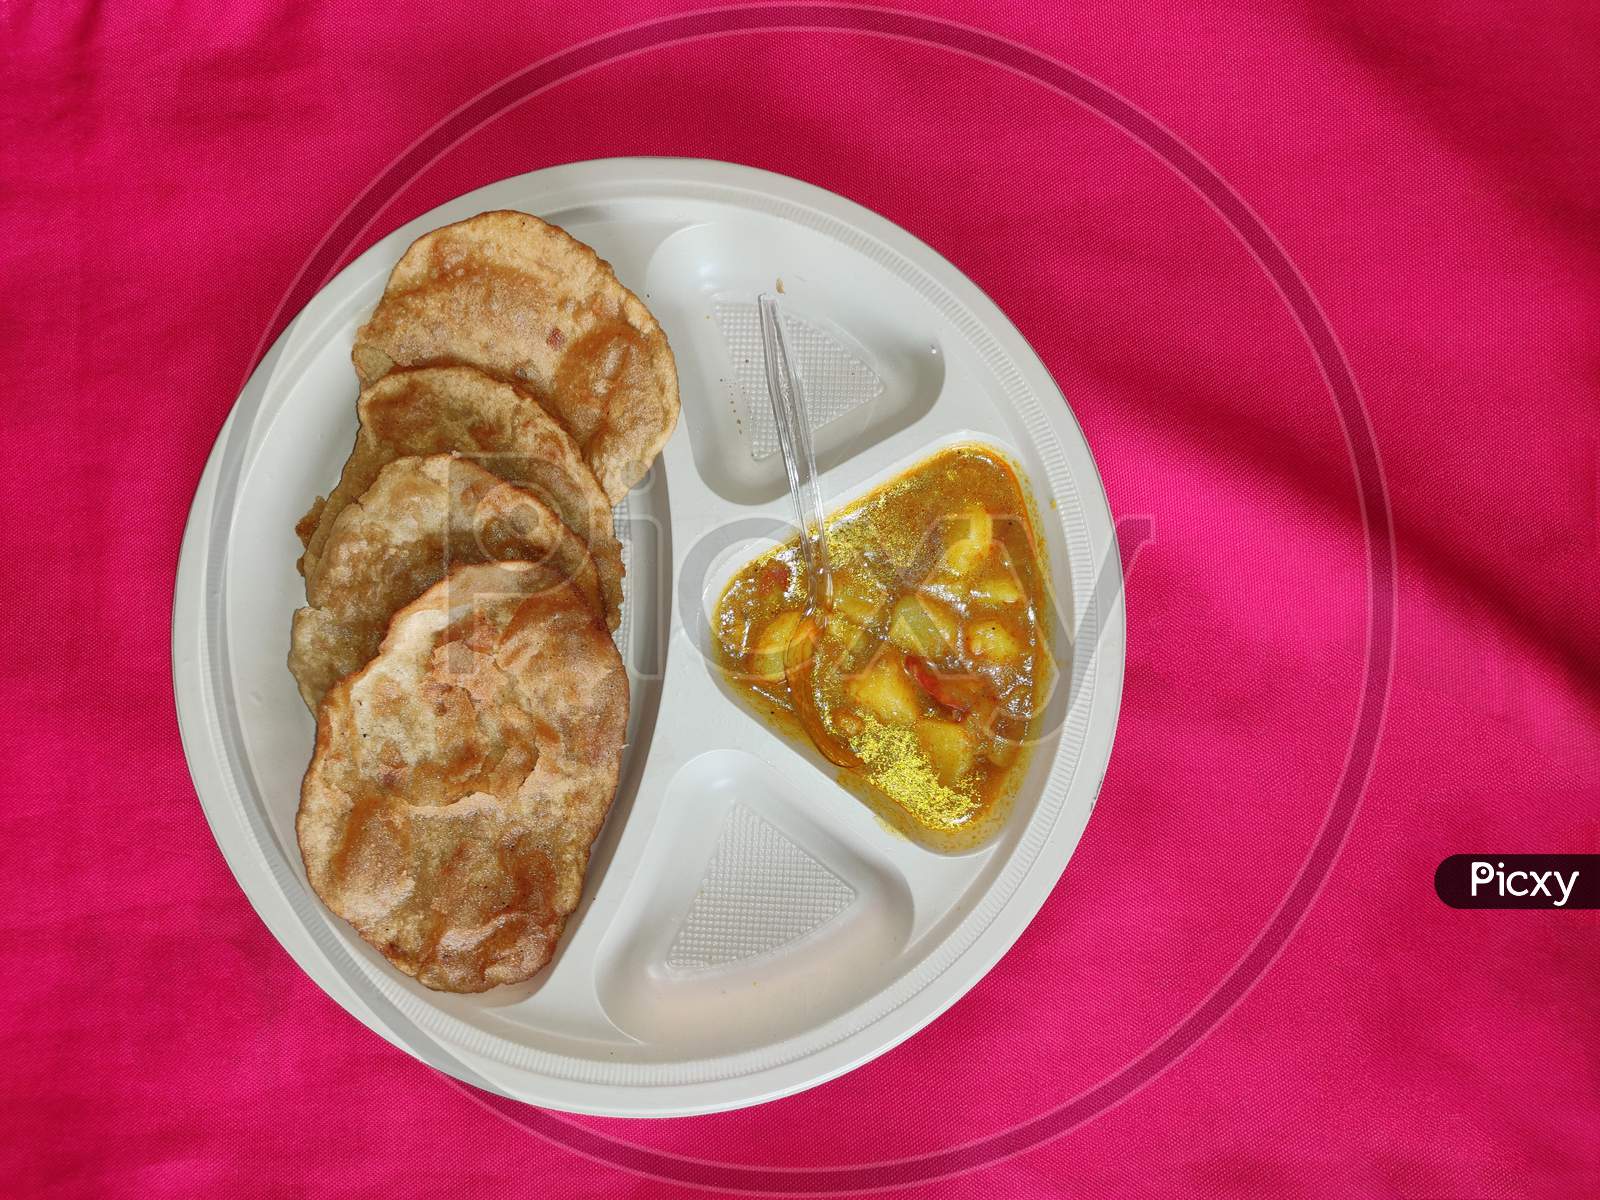 Top view: Puri and Potato Curry aalu sabji - an indian cuisine in round plate.